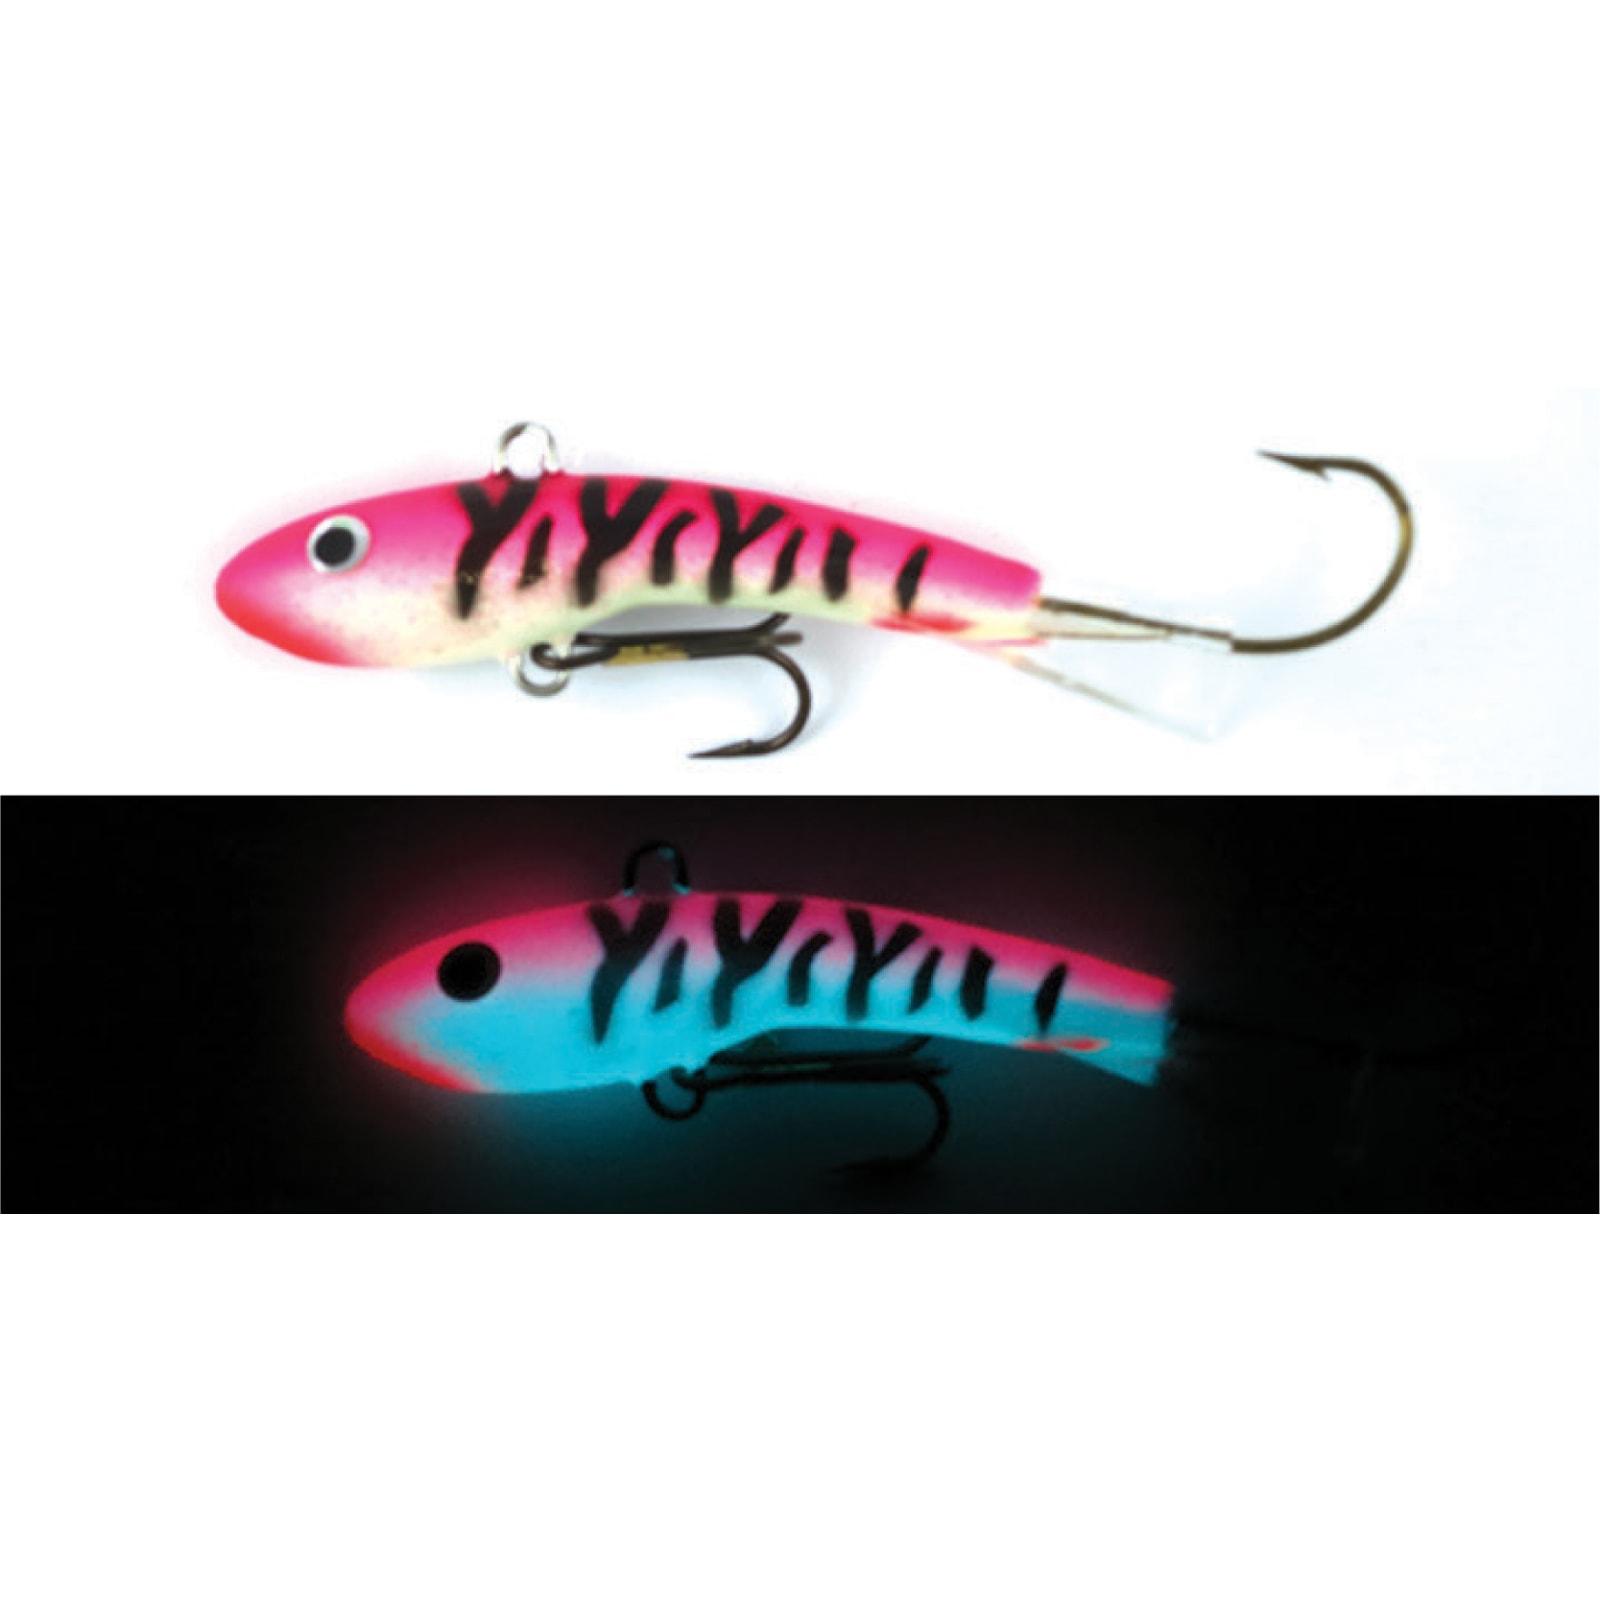 Crab Cakes Shiver Minnow by Moonshine Lures at Fleet Farm